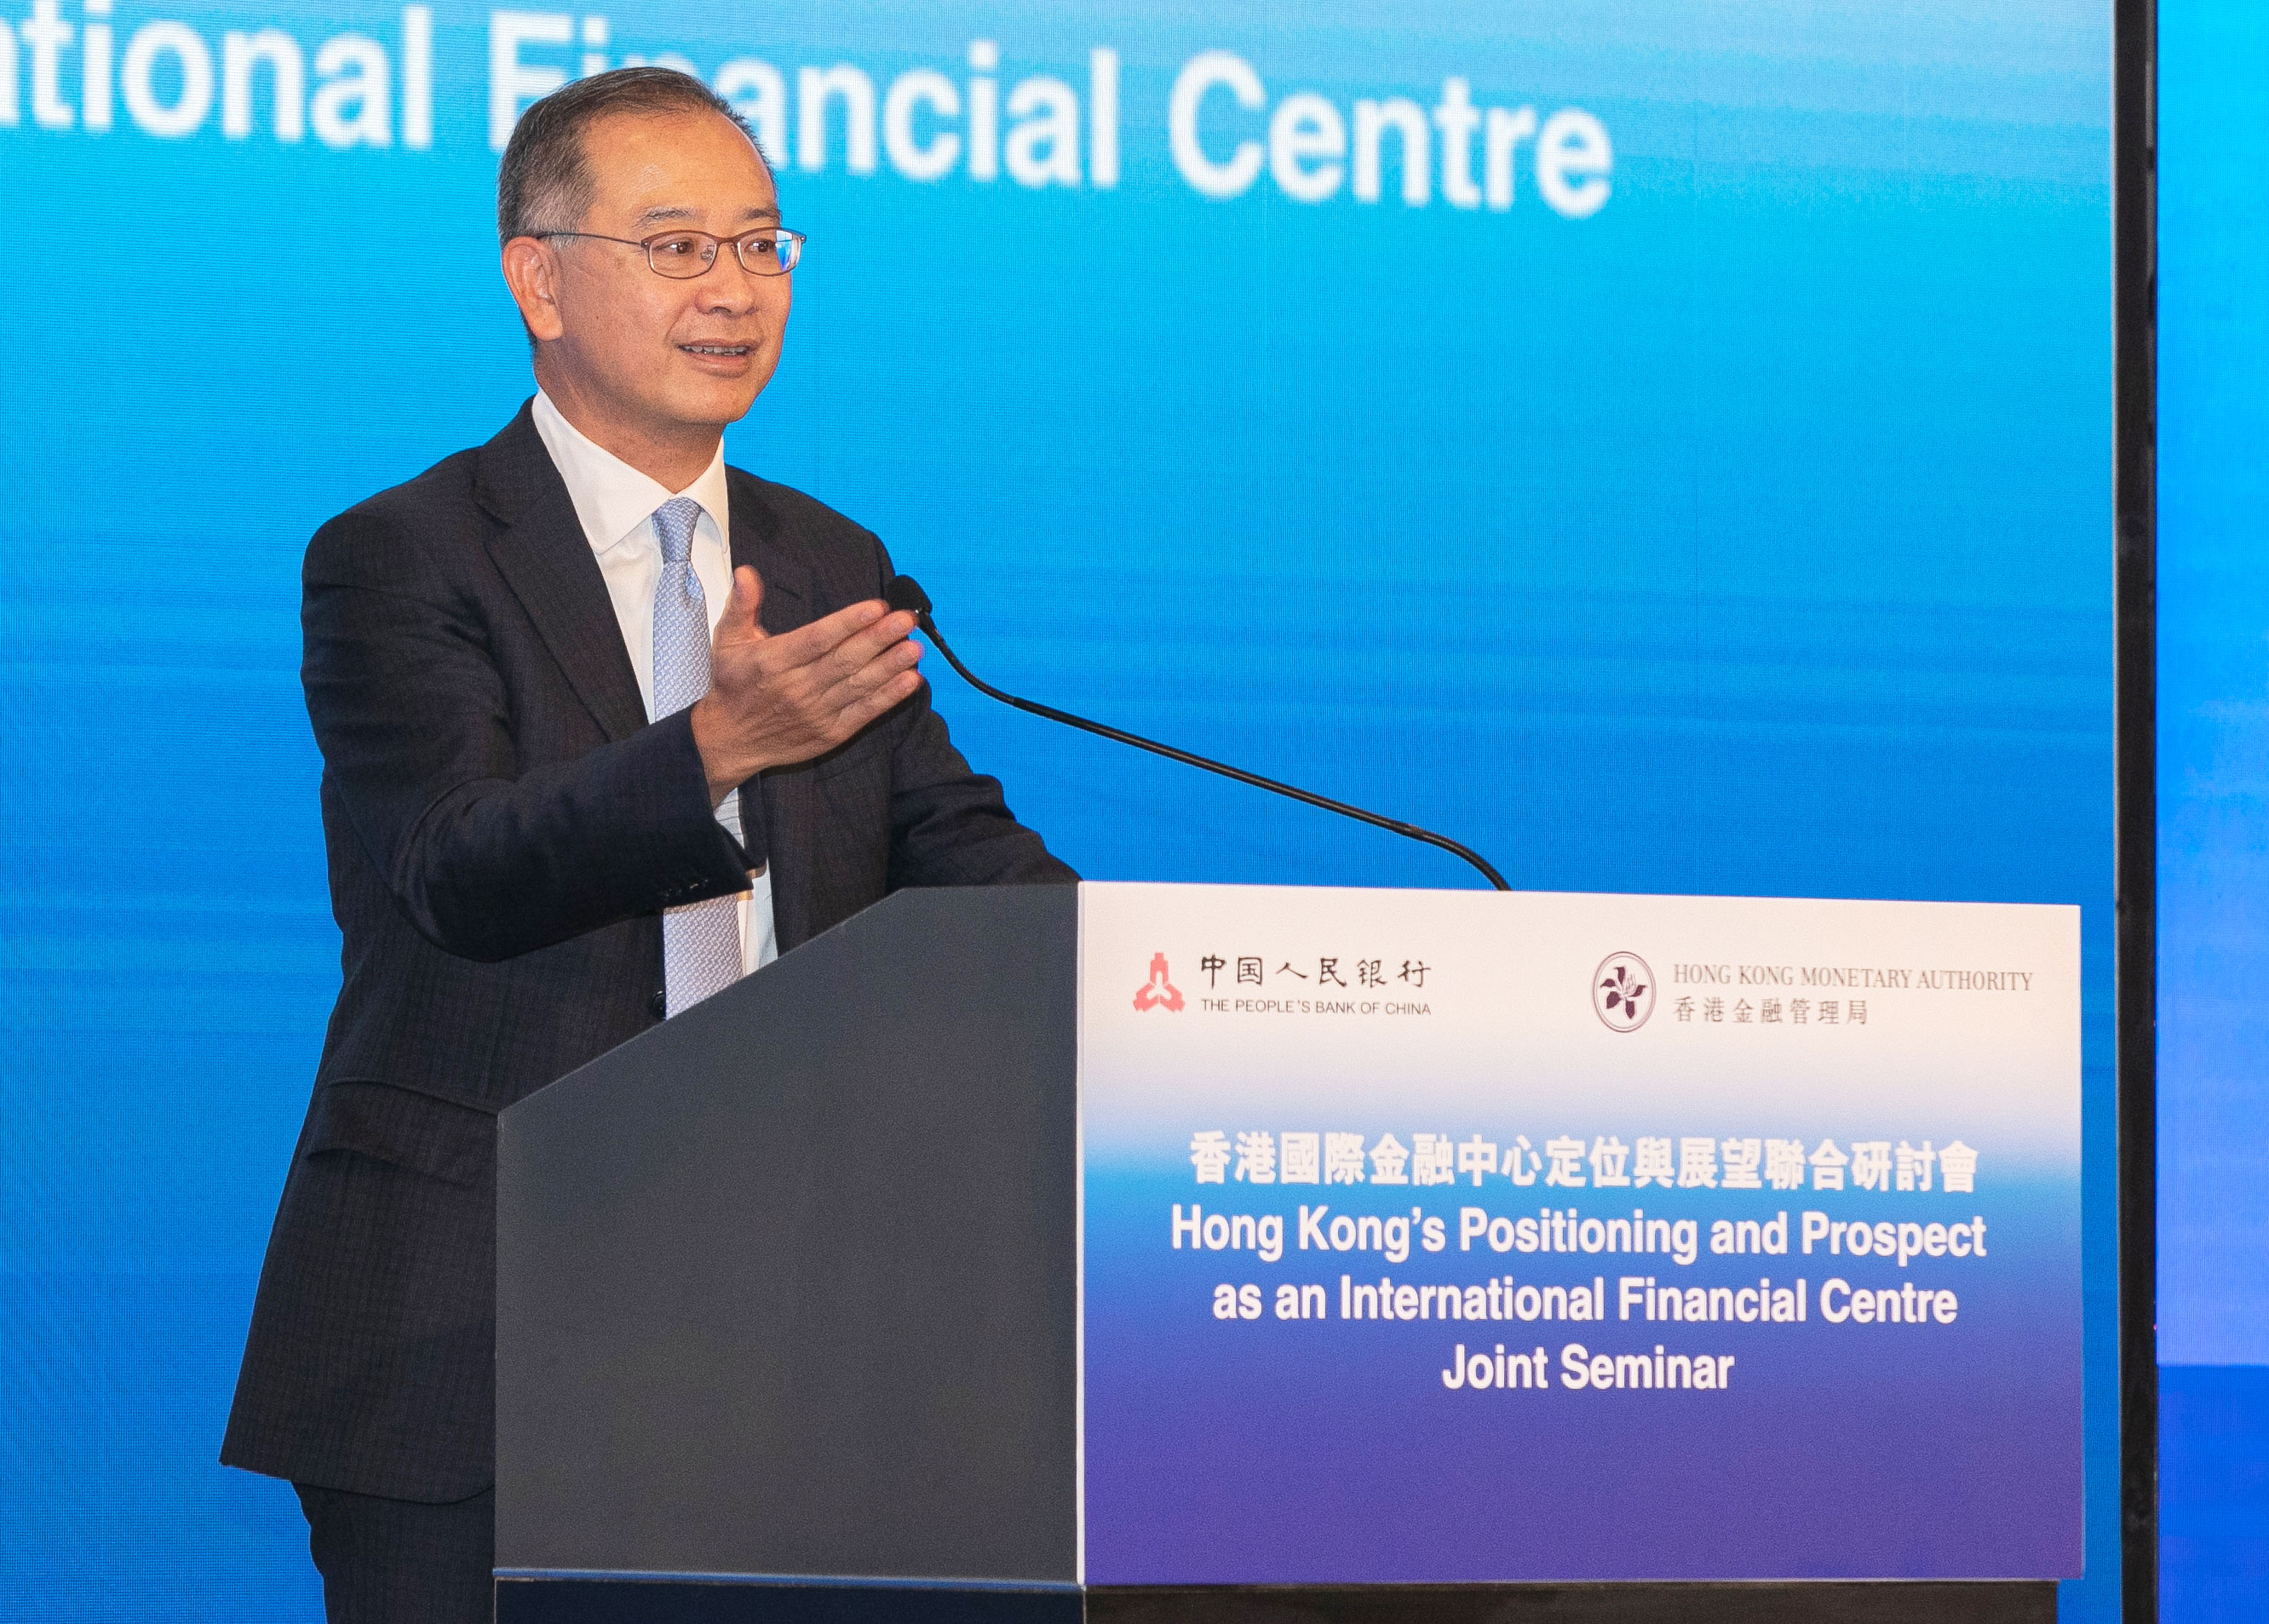 Mr Eddie Yue, Chief Executive of the Hong Kong Monetary Authority delivers opening remarks today (9 December) at the “Hong Kong’s Positioning and Prospect as an International Financial Centre” seminar and reiterates that as a leading international financial centre, Hong Kong will leverage its unique edges to strive for breakthroughs and developments across various segments of the financial sector.